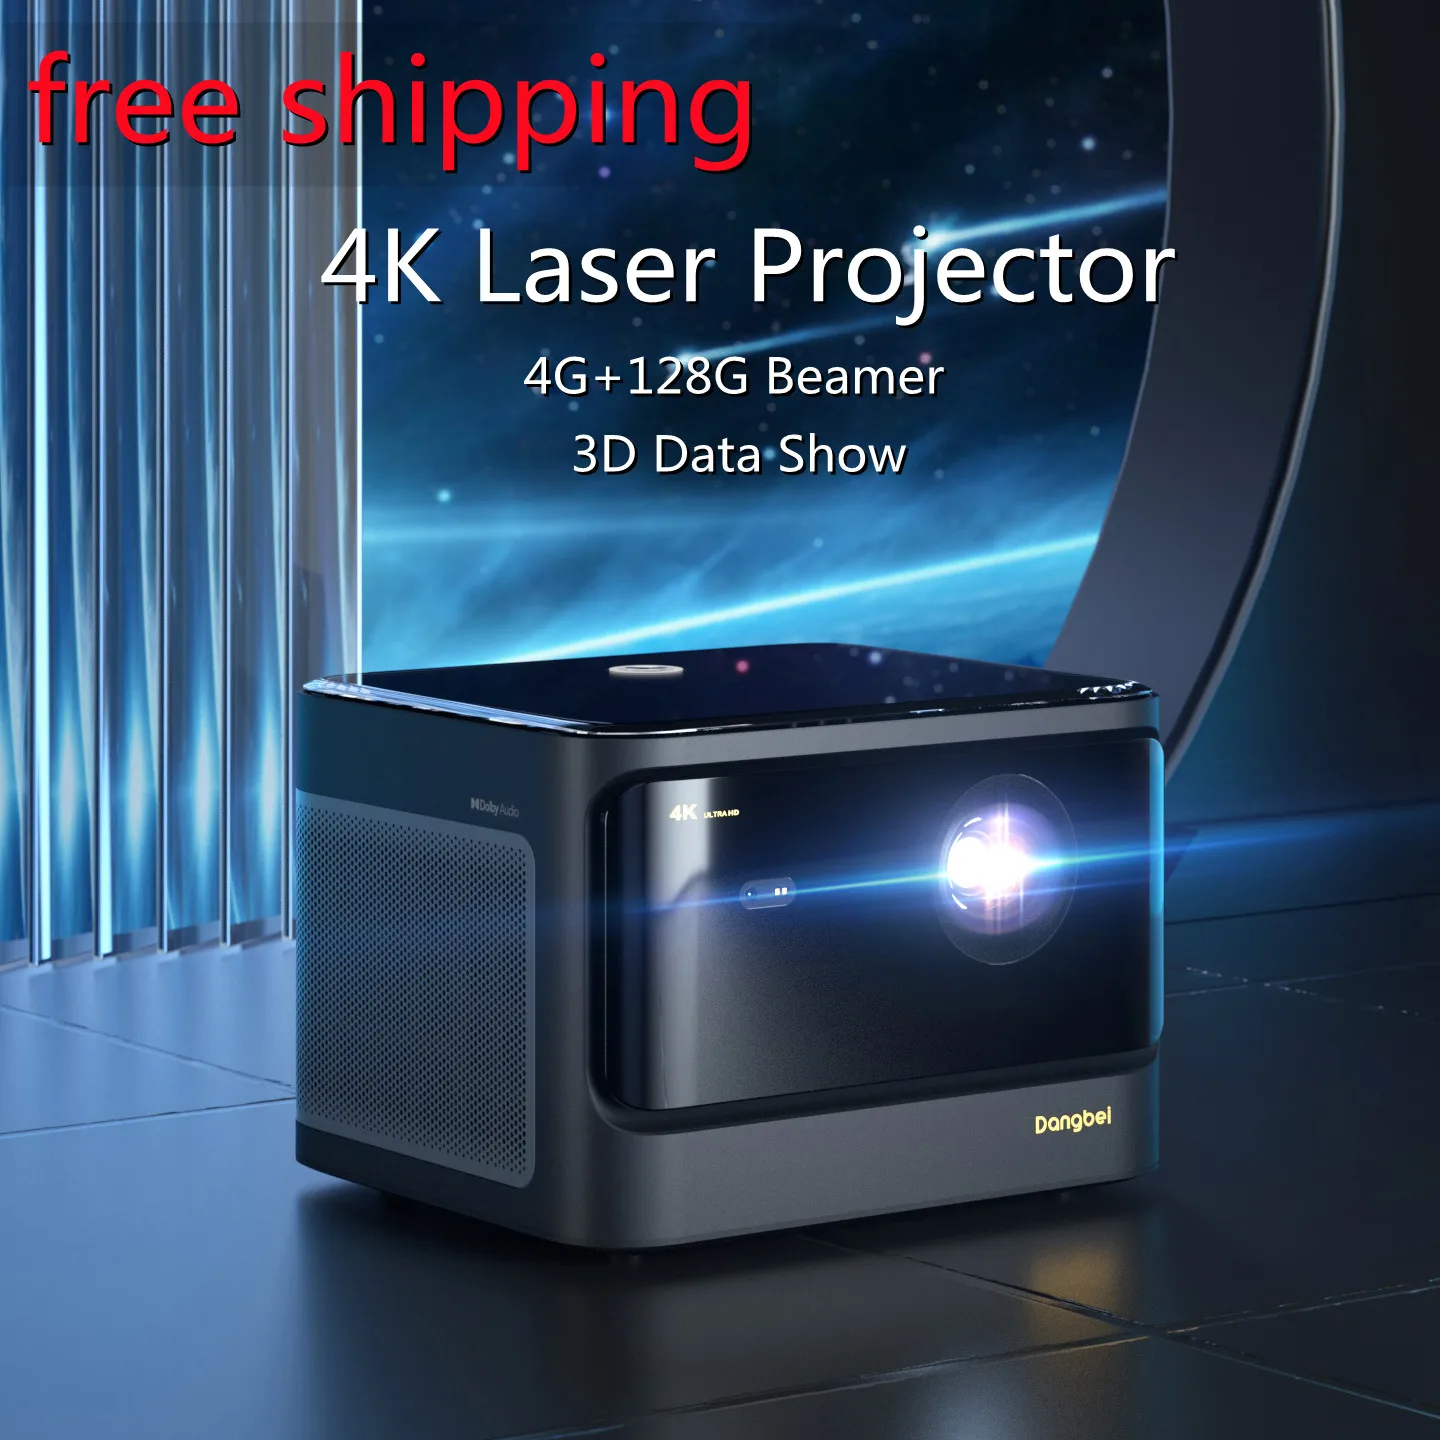 

Dangbei Mars Pro 4K Laser Projector DLP Home Theater 3200 ANSI Smart tv with Android 3D Data Show Projector 4G+128G Beamer